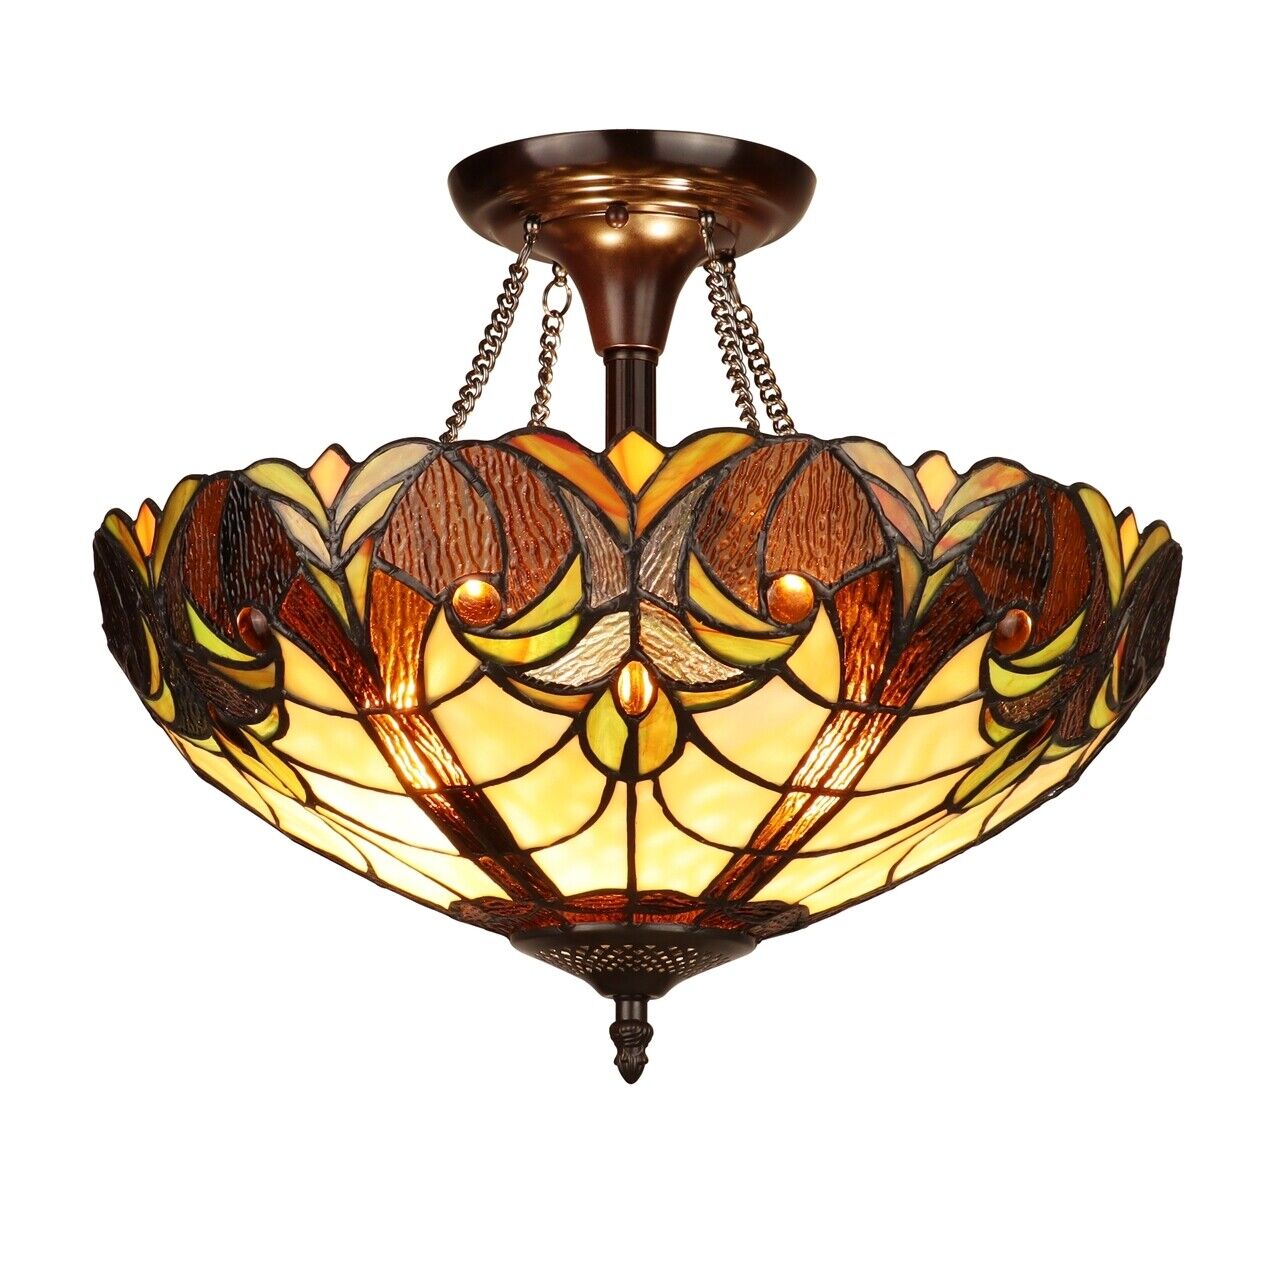 15.75" Antique Style Stained Glass Semi Flush Ceiling Uplight